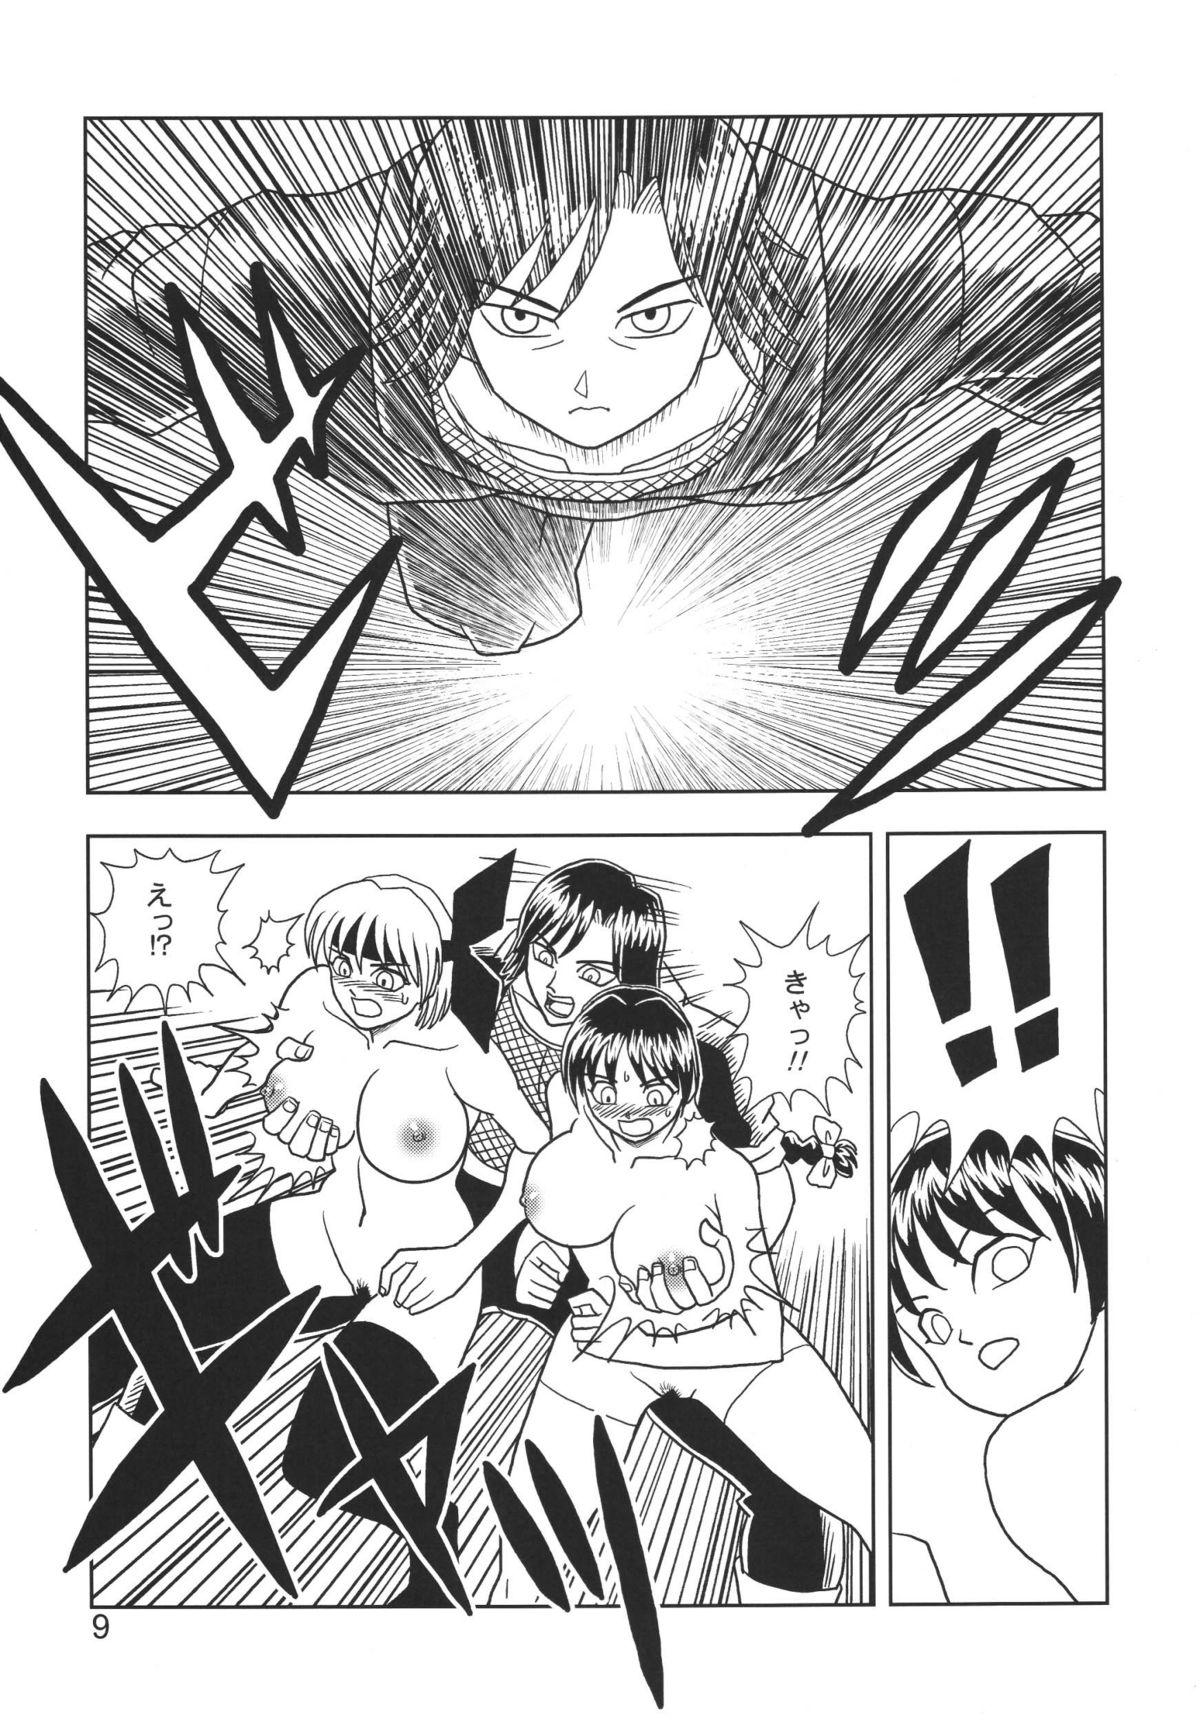 Rough Kasumi or Ayane - Dead or alive Abg - Page 9